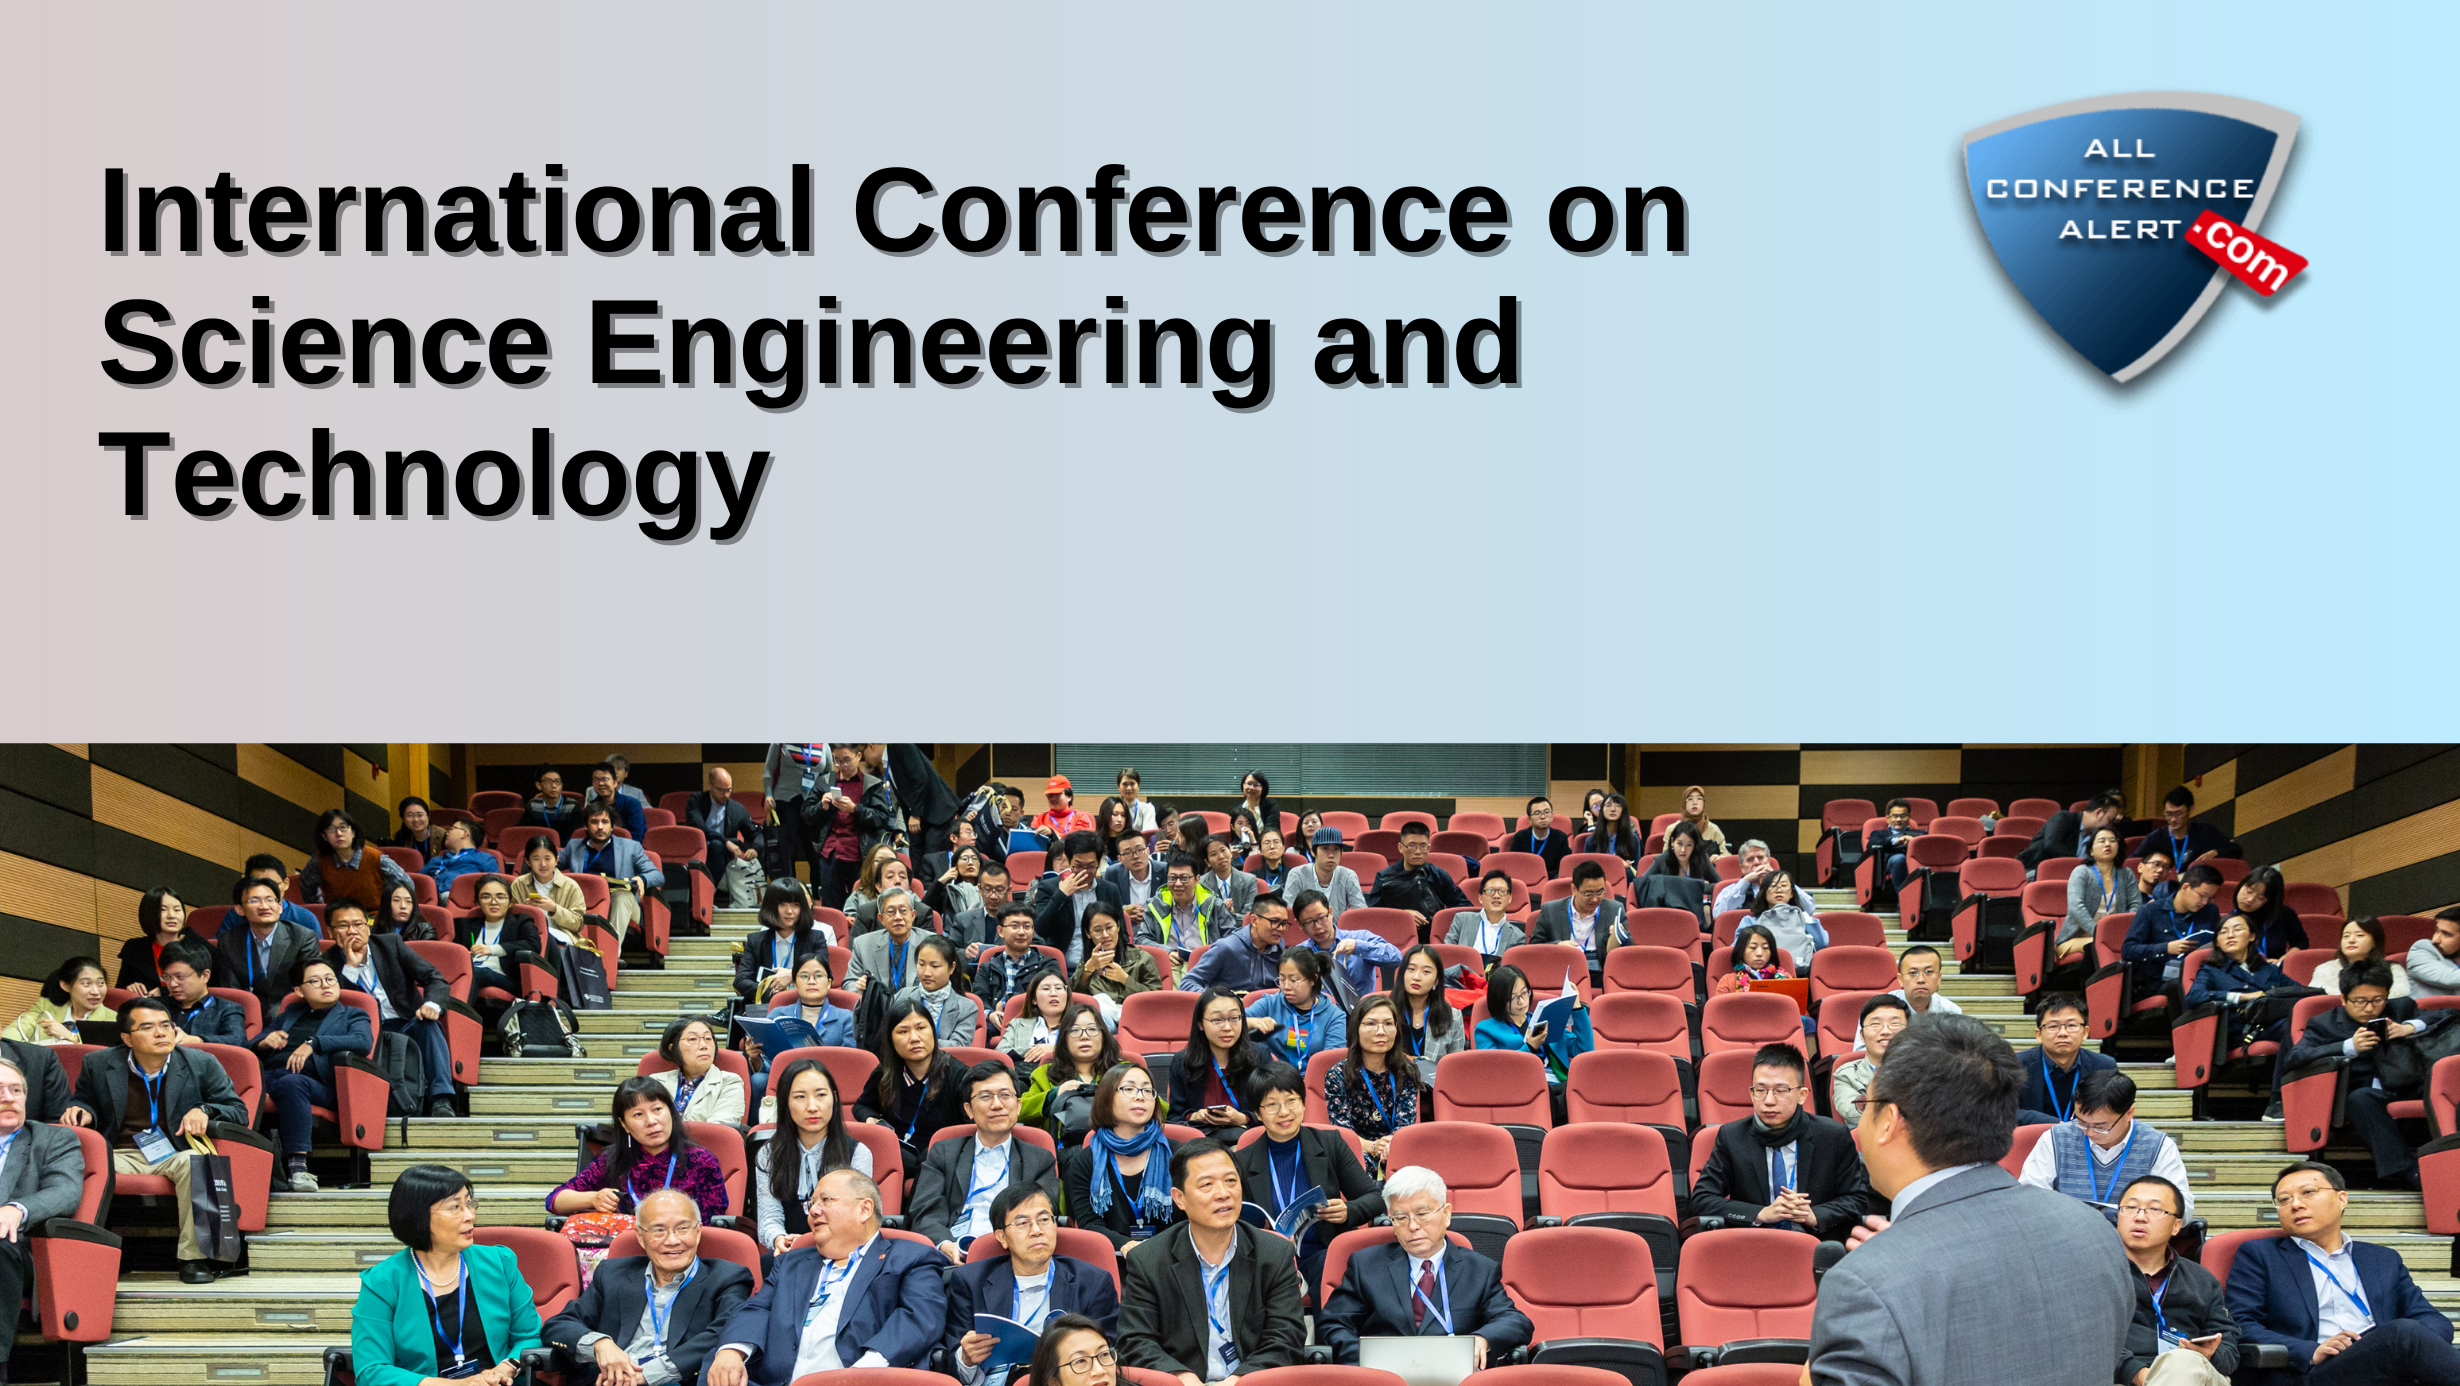 International Conference on Science Engineering and Technology